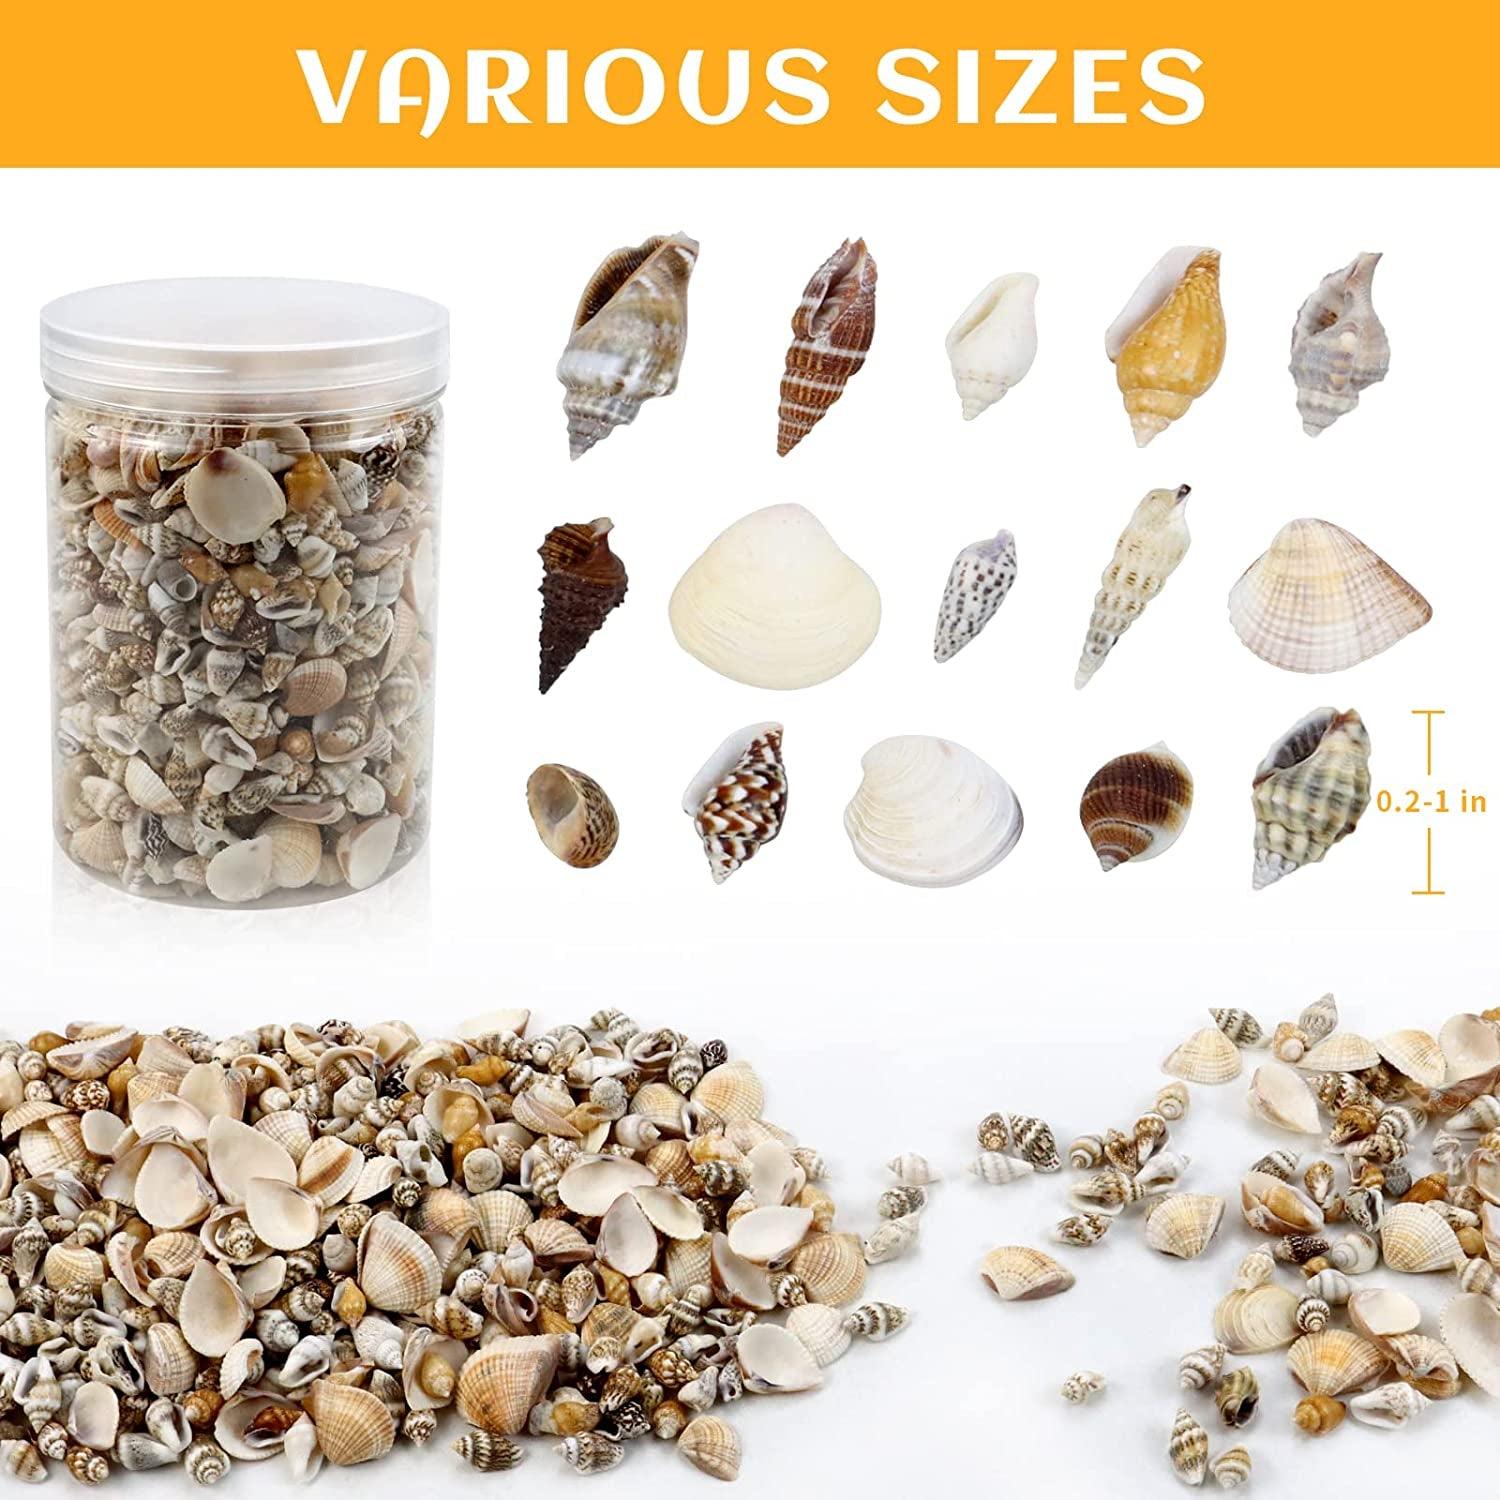 2000 PCS Tiny Mini Small Sea Shells for Crafting Spiral Conch Shells for  Crafts Charms for Home Decorations Candle Decor DIY Fish Tank and Beach  Vase